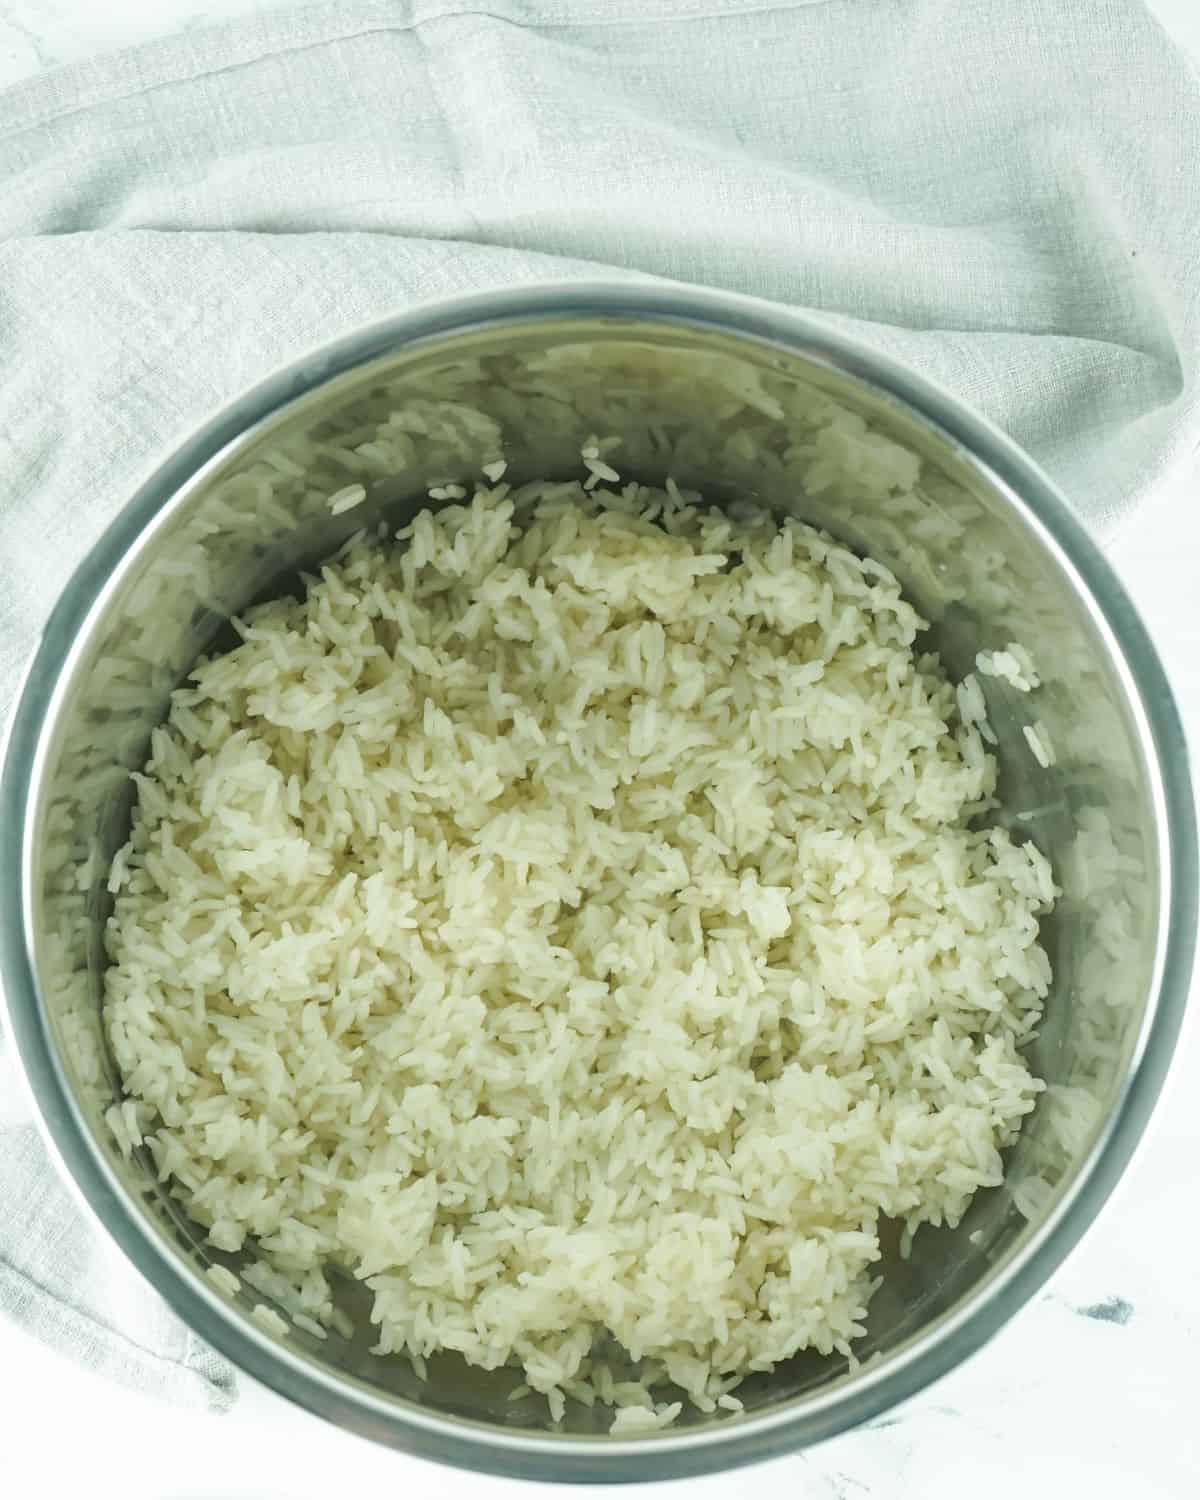 An Instant Pot vessel with cooked white rice.